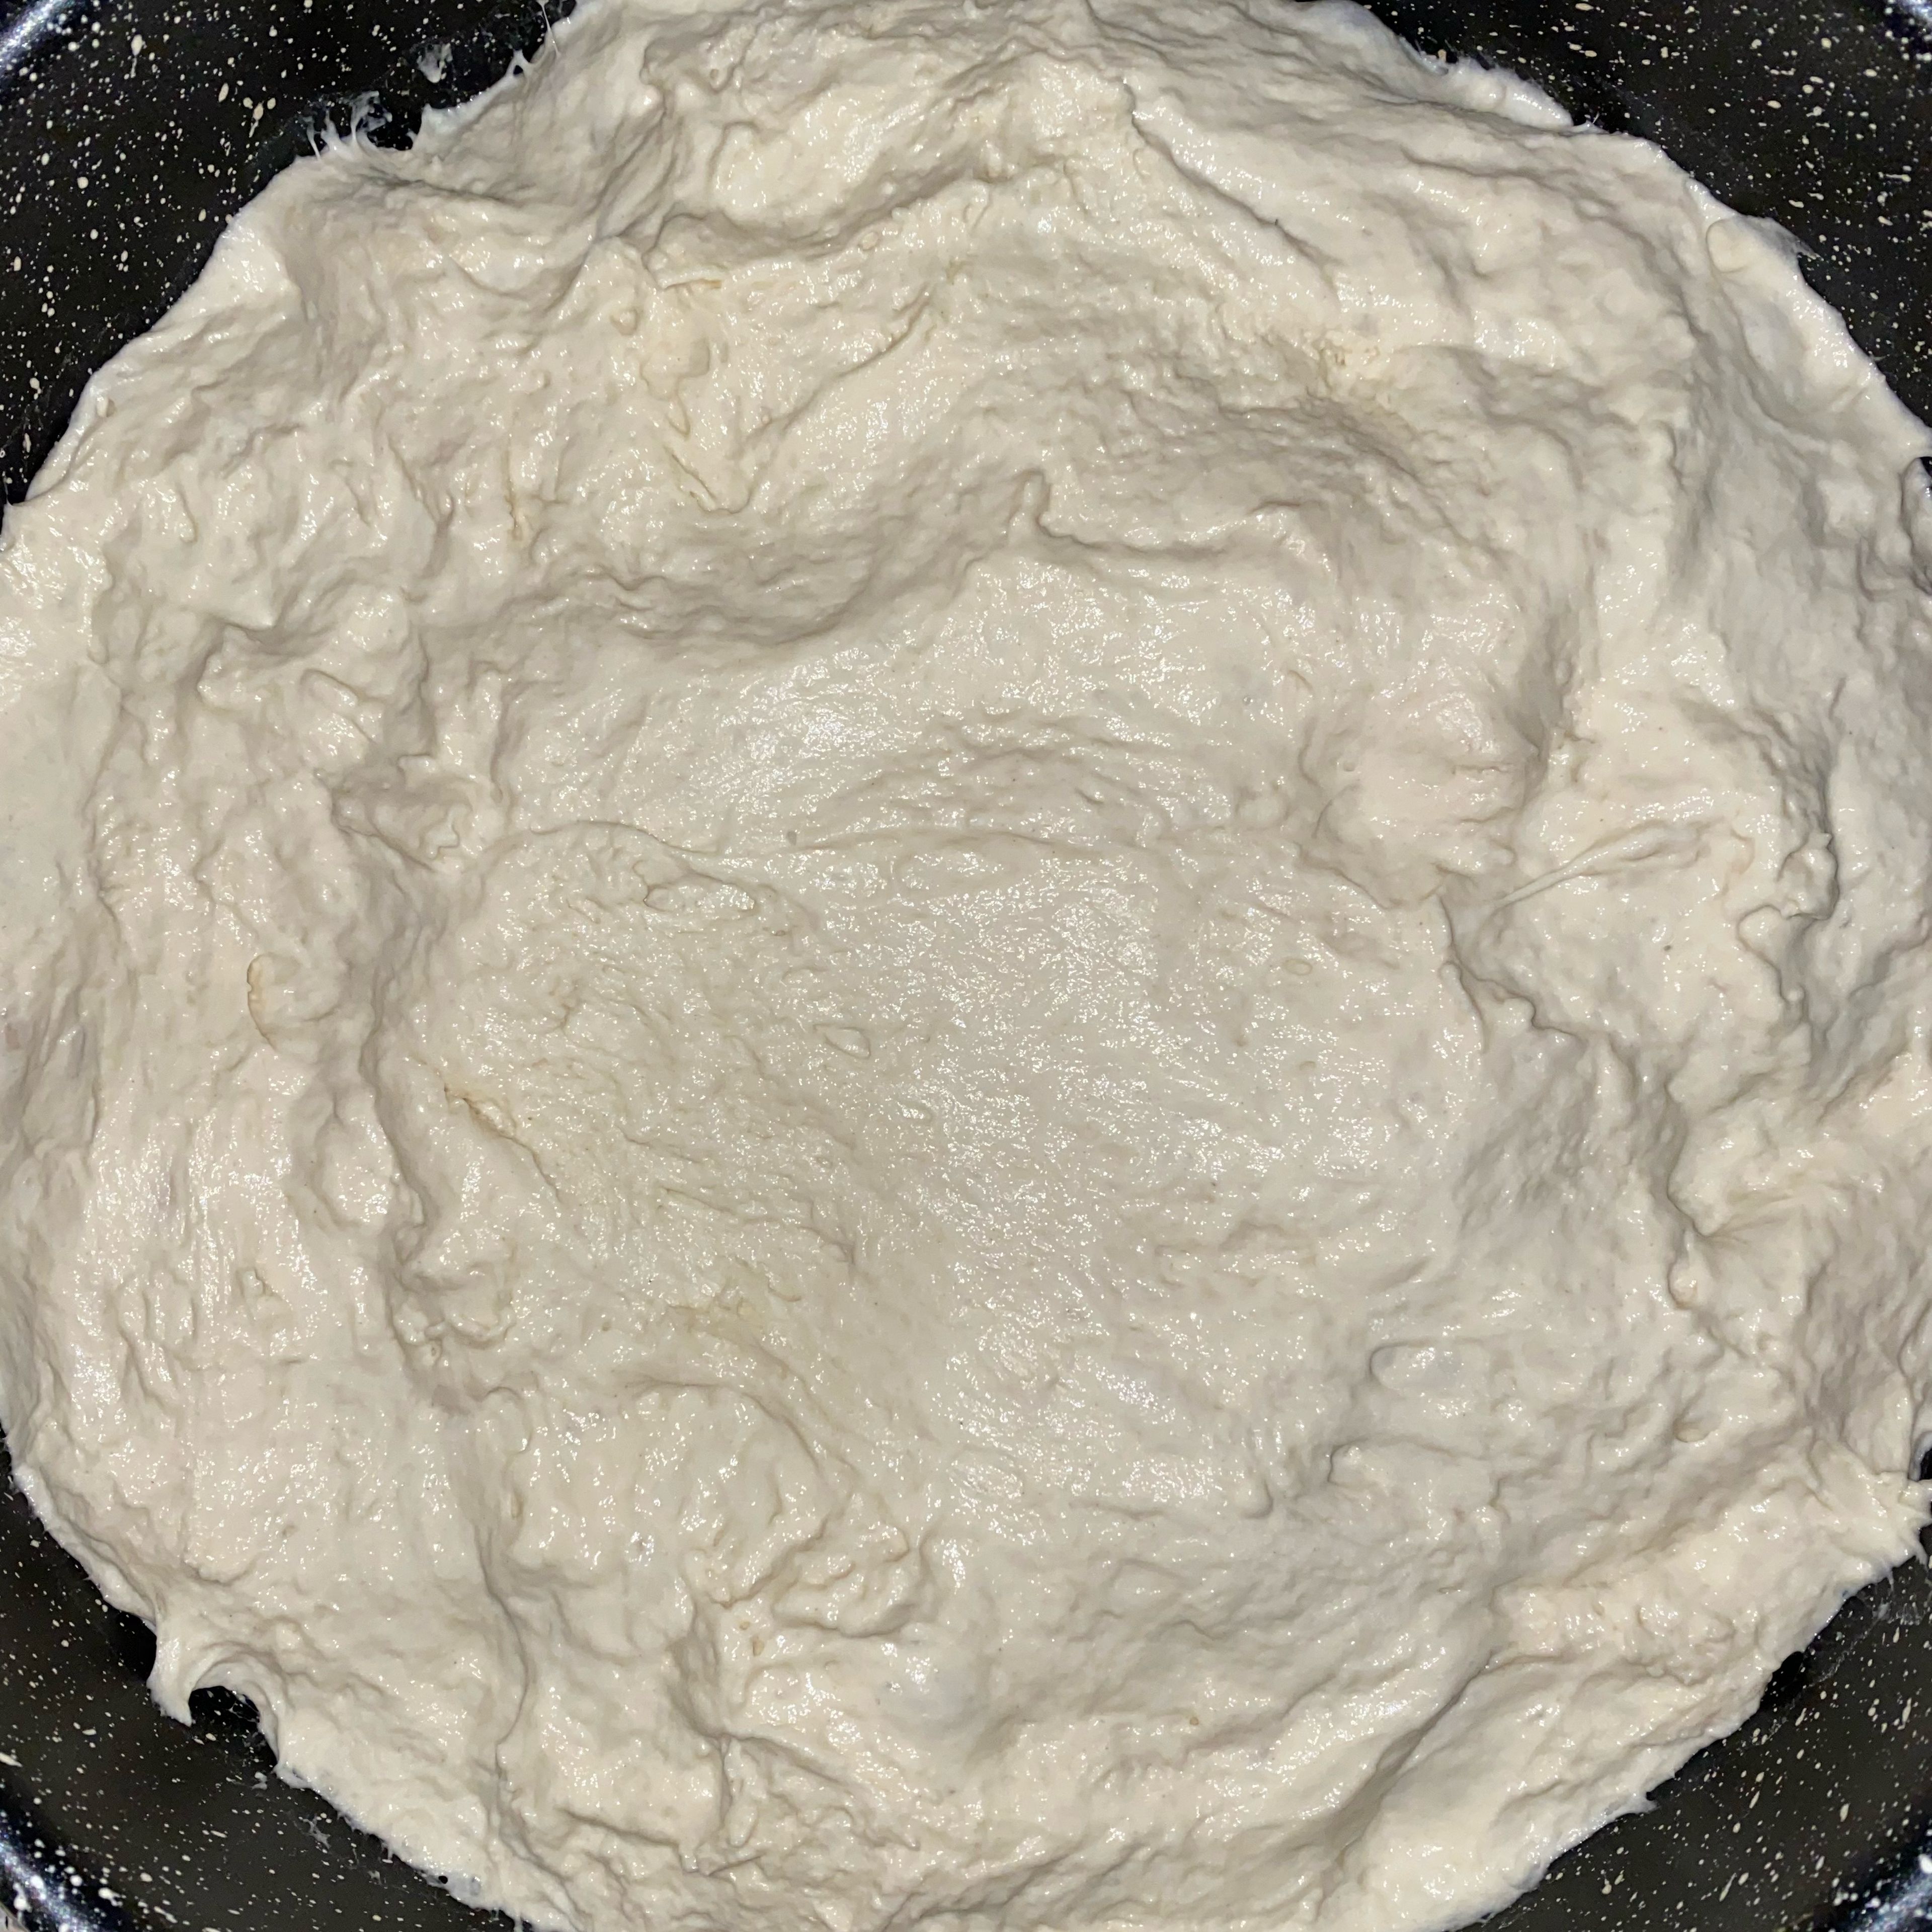 In a large bowl, combine the flour, yeast, salt, and water and stir with a large spoon until it comes together. Cover with plastic wrap and let rest overnight or at least 8 hours.